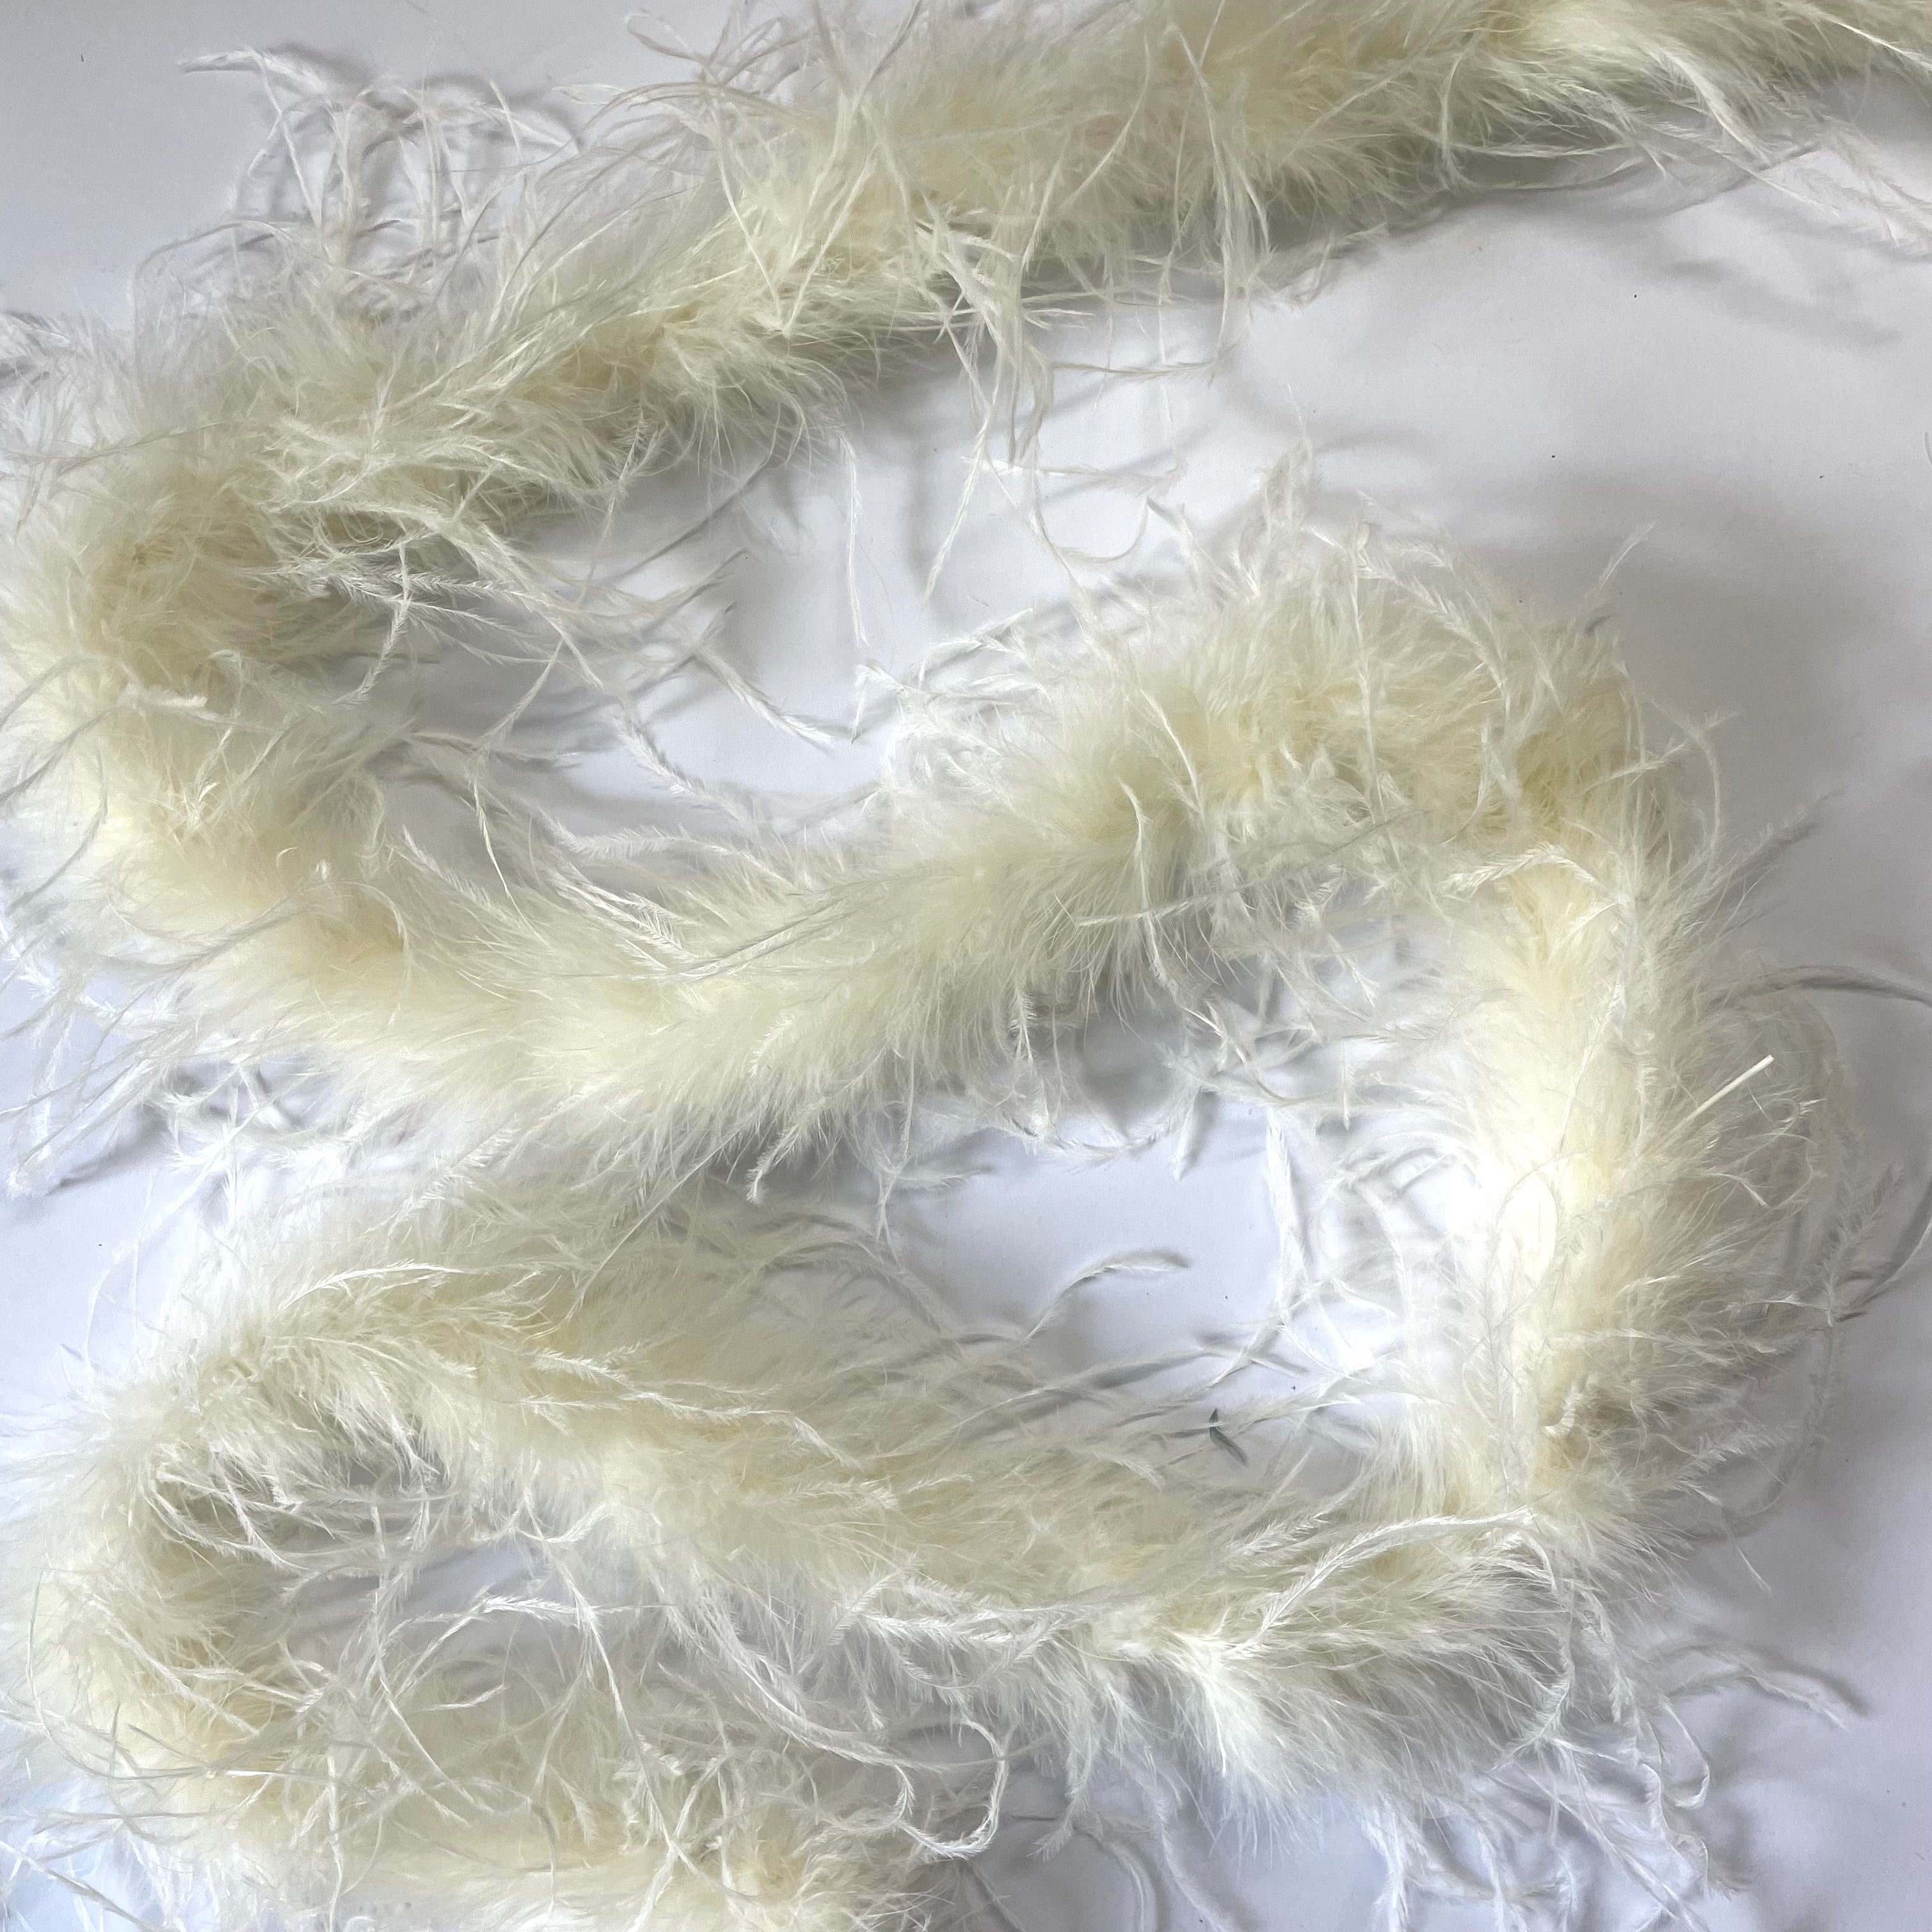 Ostrich & Marabou Feather Boa - Ivory